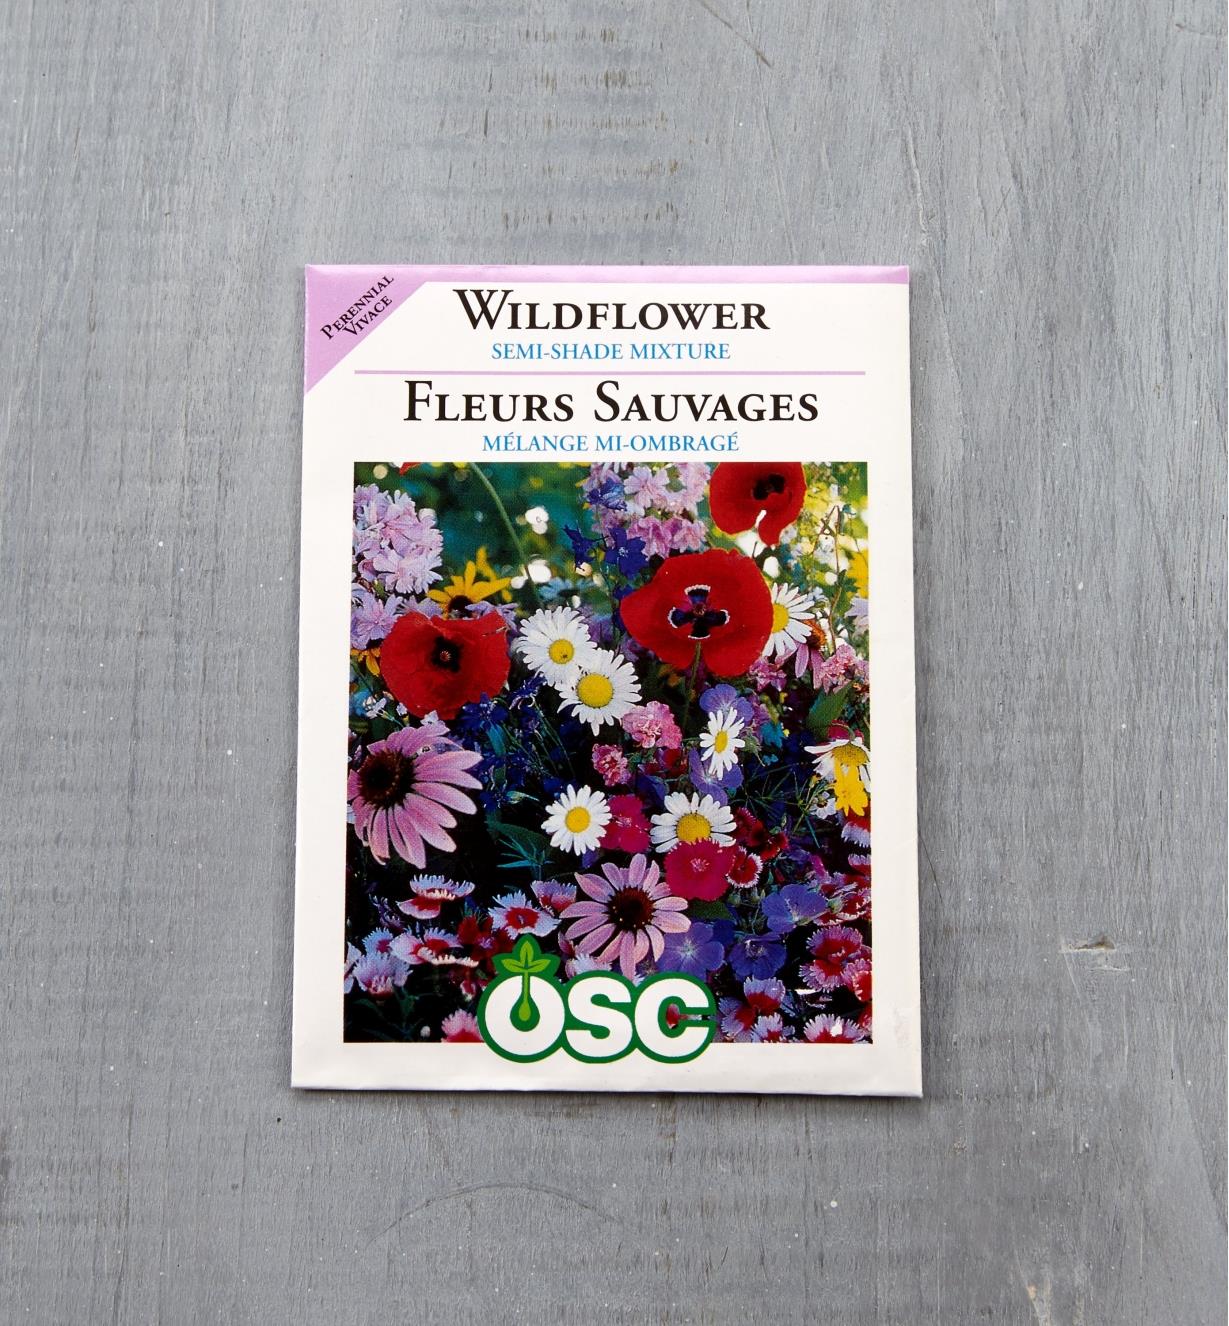 SD151 - Wildflowers (Partial Shade Mix)